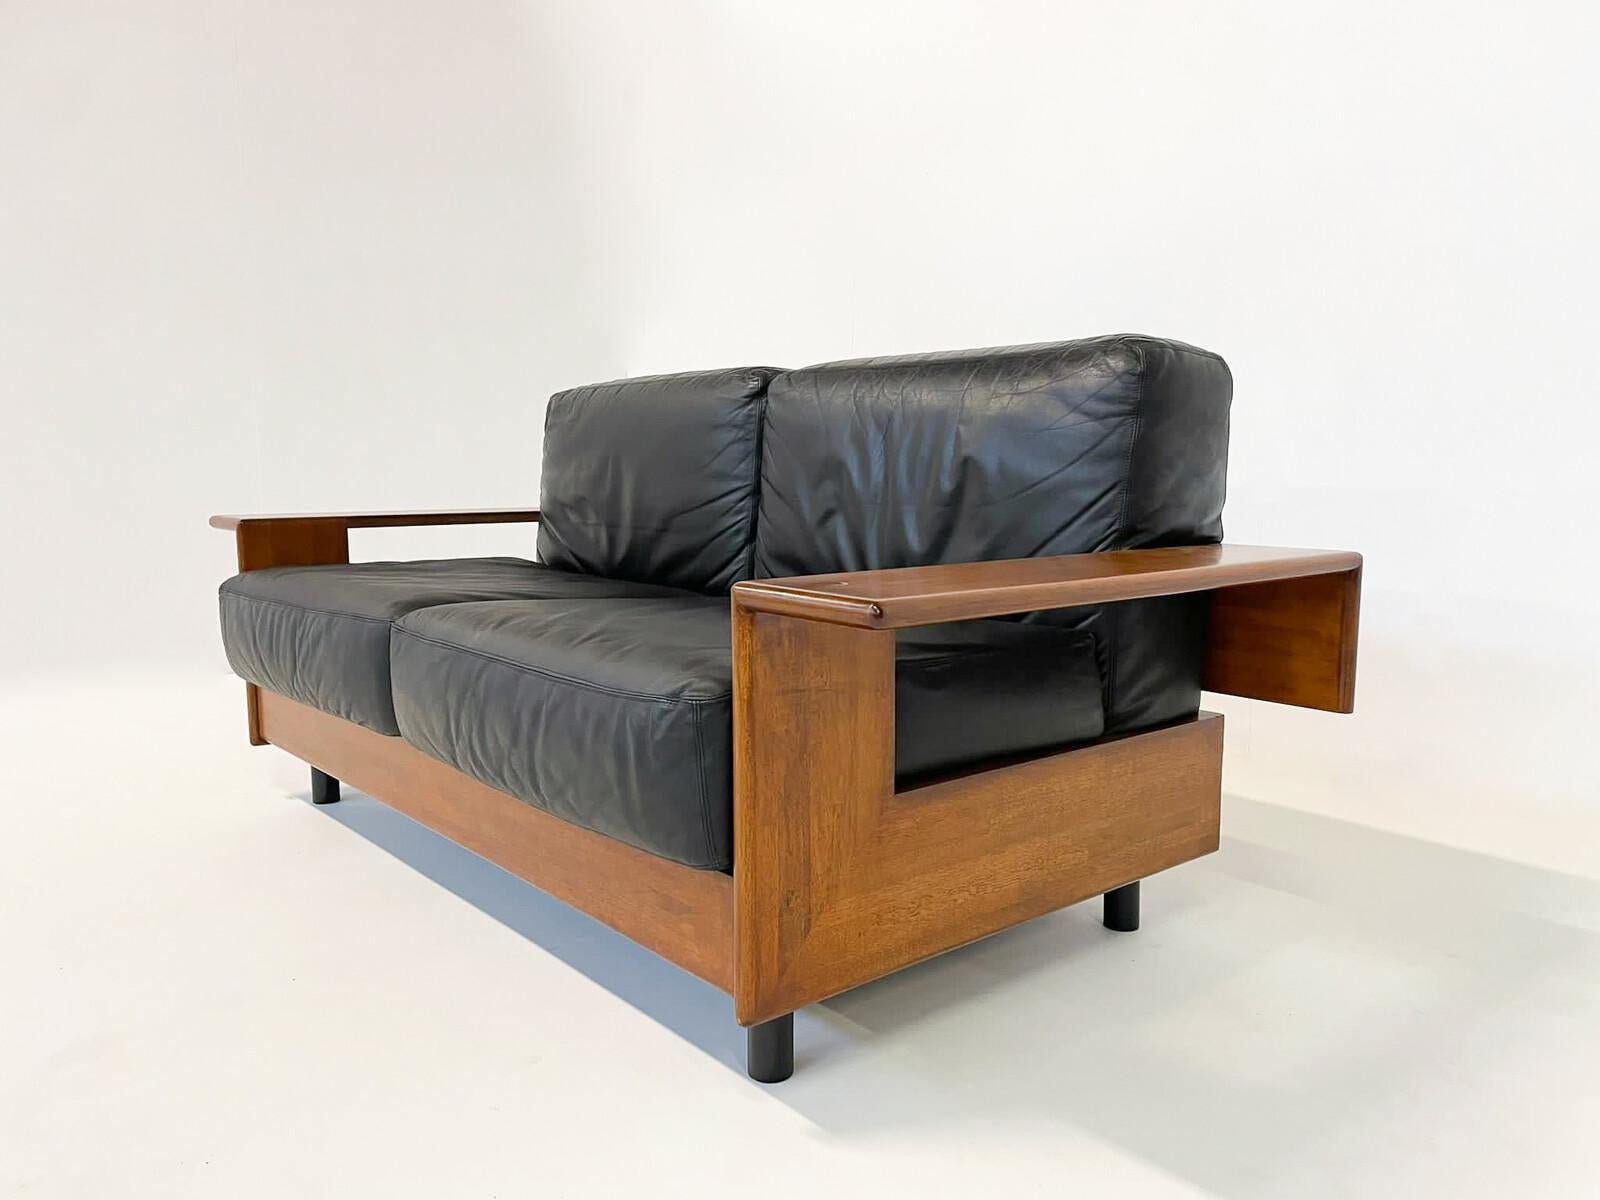 Mid-Century Modern Italian sofa, black leather and wood, 1960s - two available.